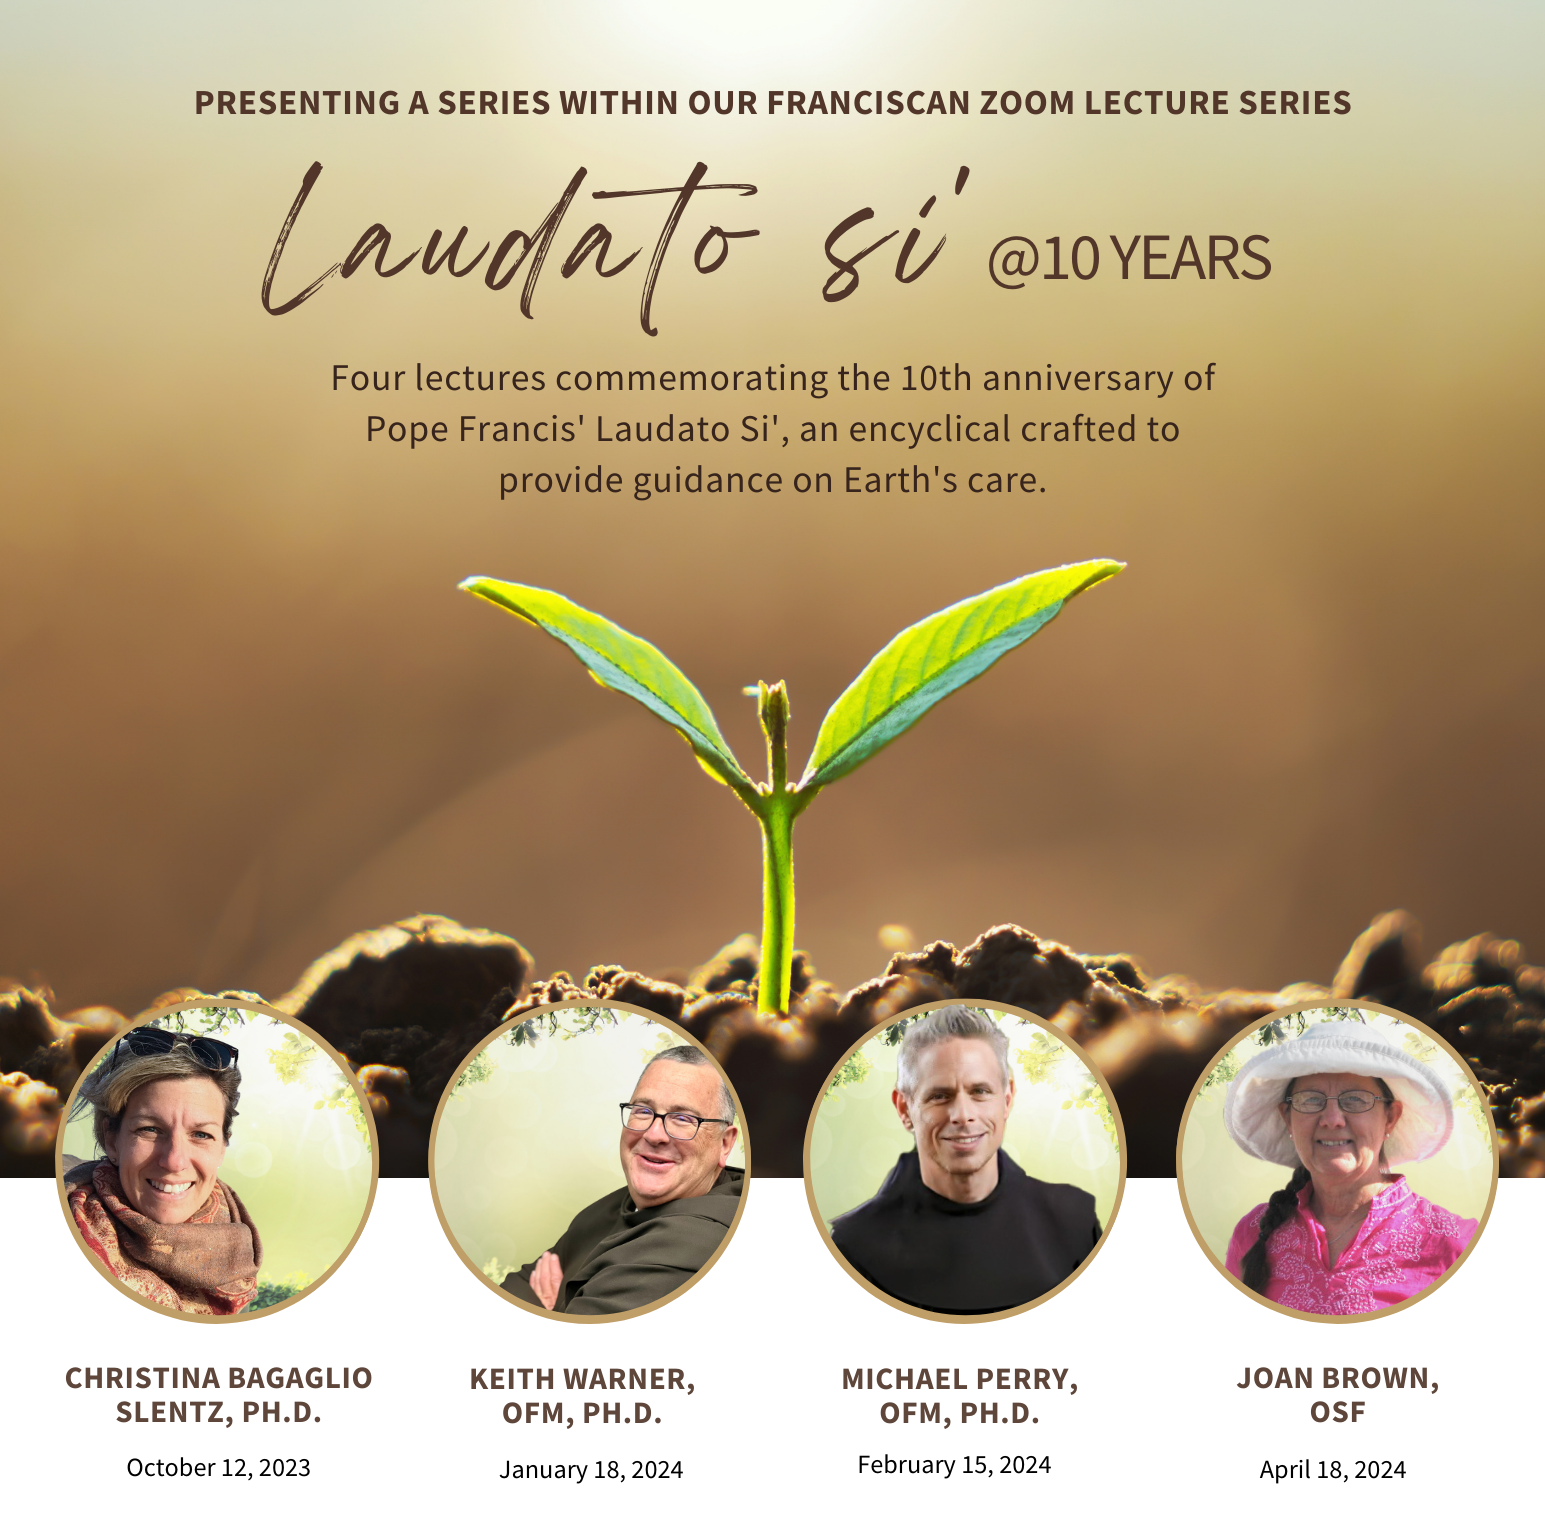 FST Franciscan Zoom Lectures Laudato Si' @ 10 Years (2)